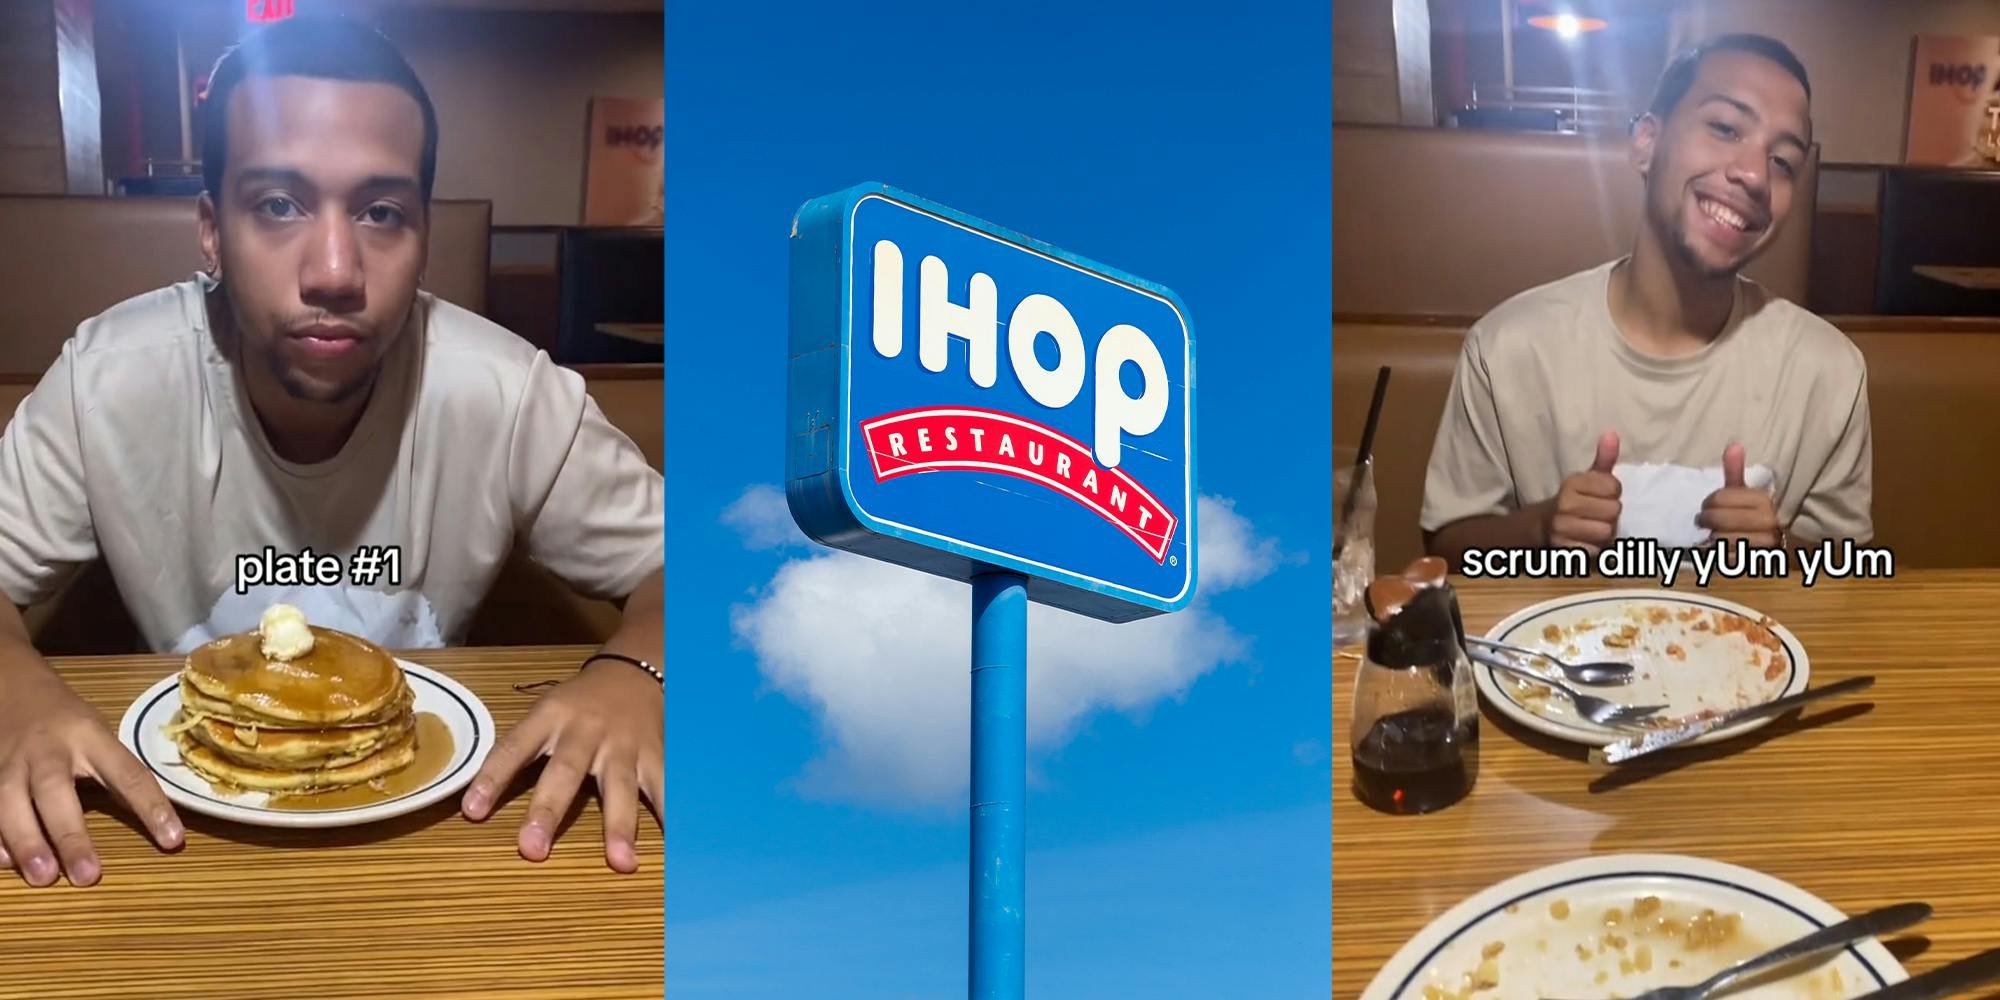 IHOP customers try the $5 all-you-can-eat pancake deal. It doesn't go well